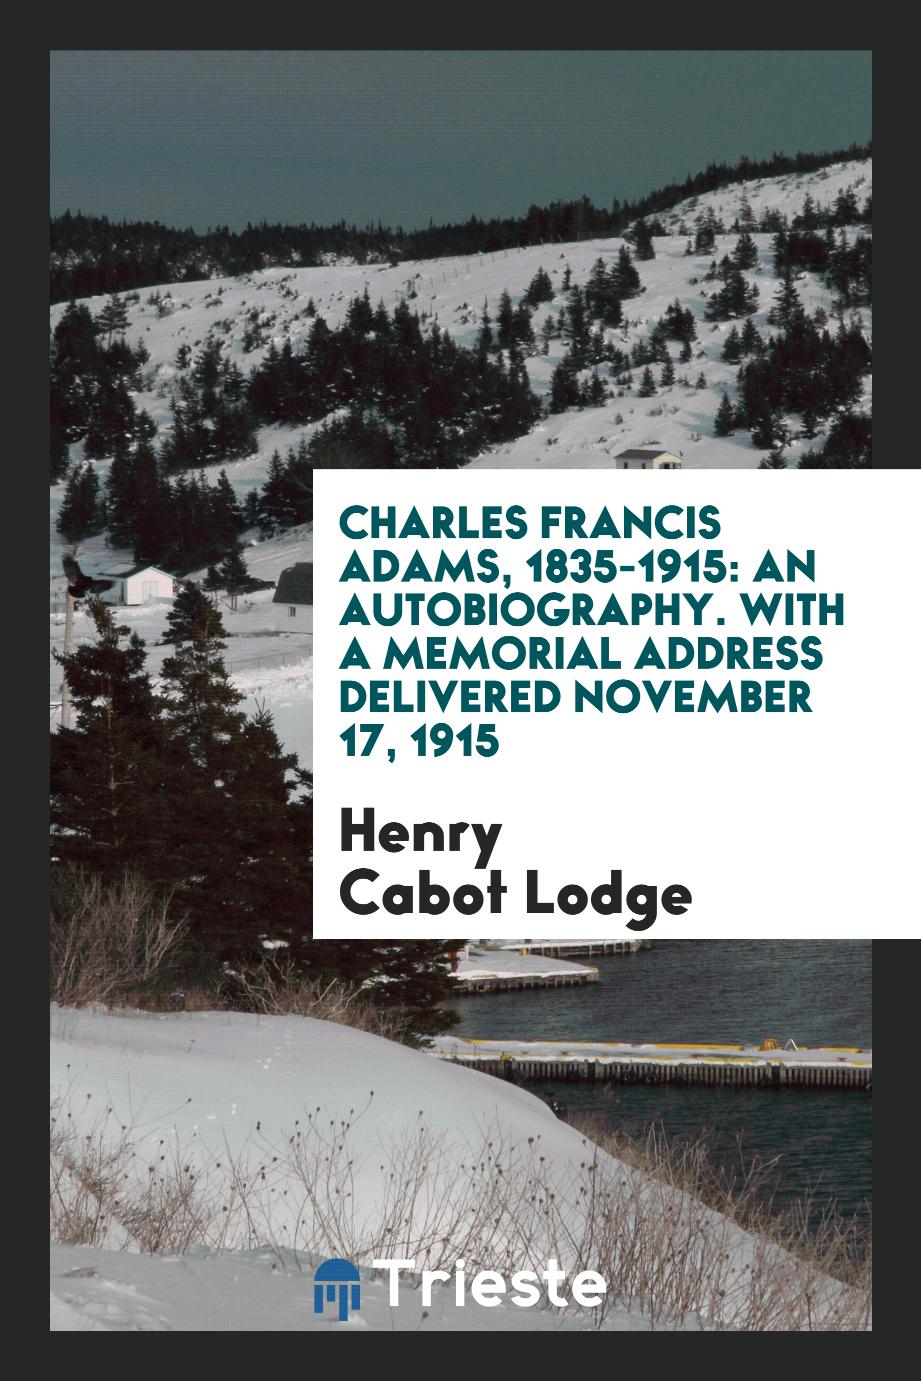 Henry Cabot Lodge - Charles Francis Adams, 1835-1915: An Autobiography. With a Memorial Address Delivered November 17, 1915